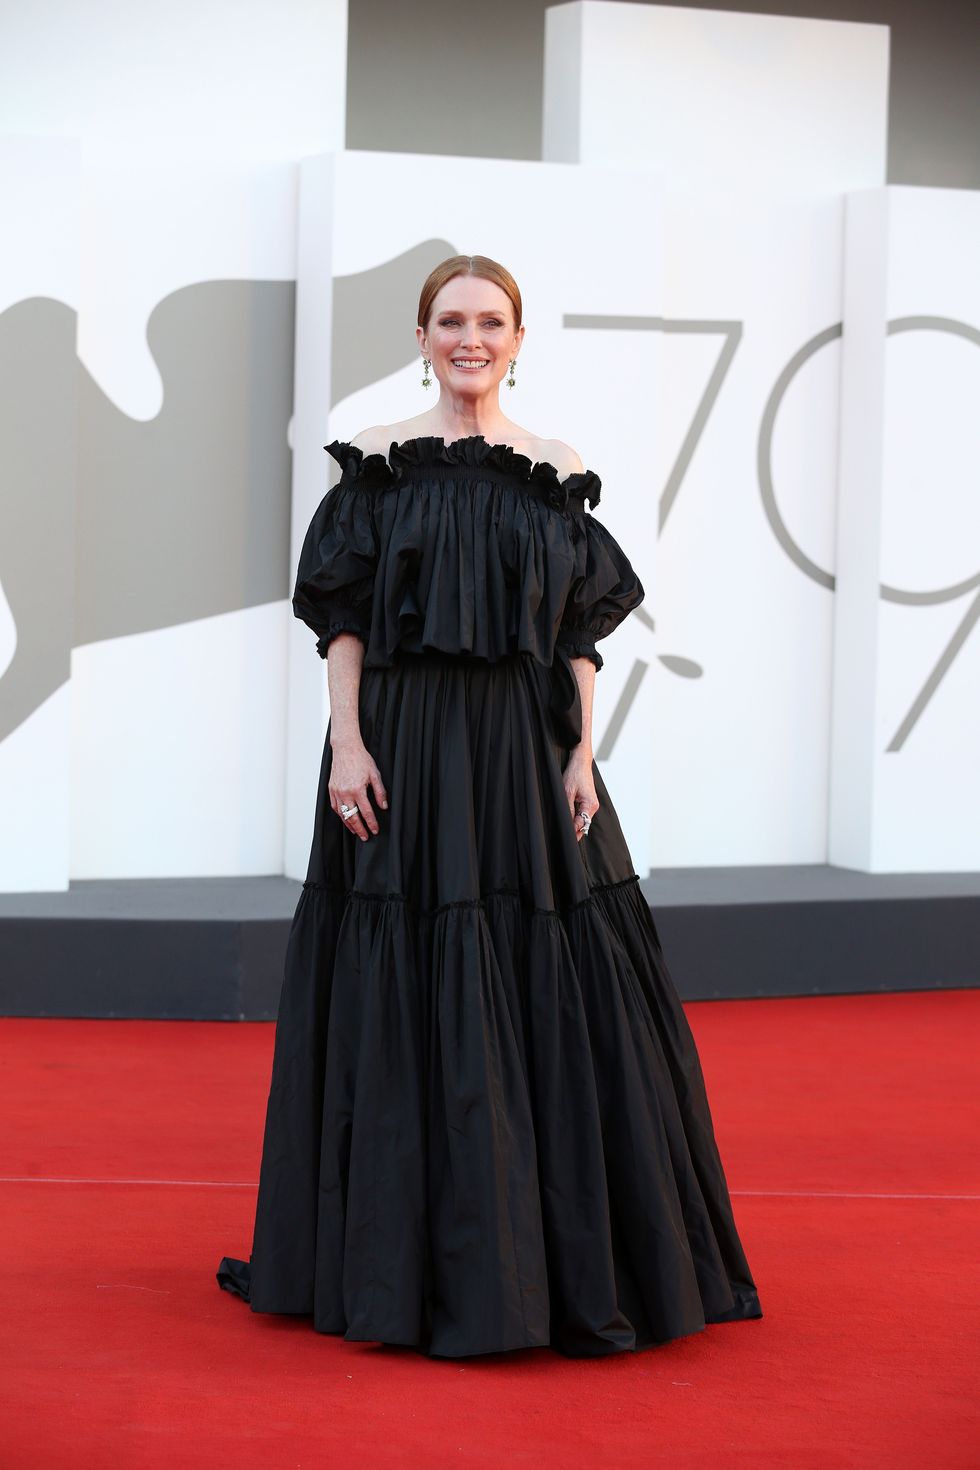 julianne moore at the closing ceremony red carpet 79th venice international film festival